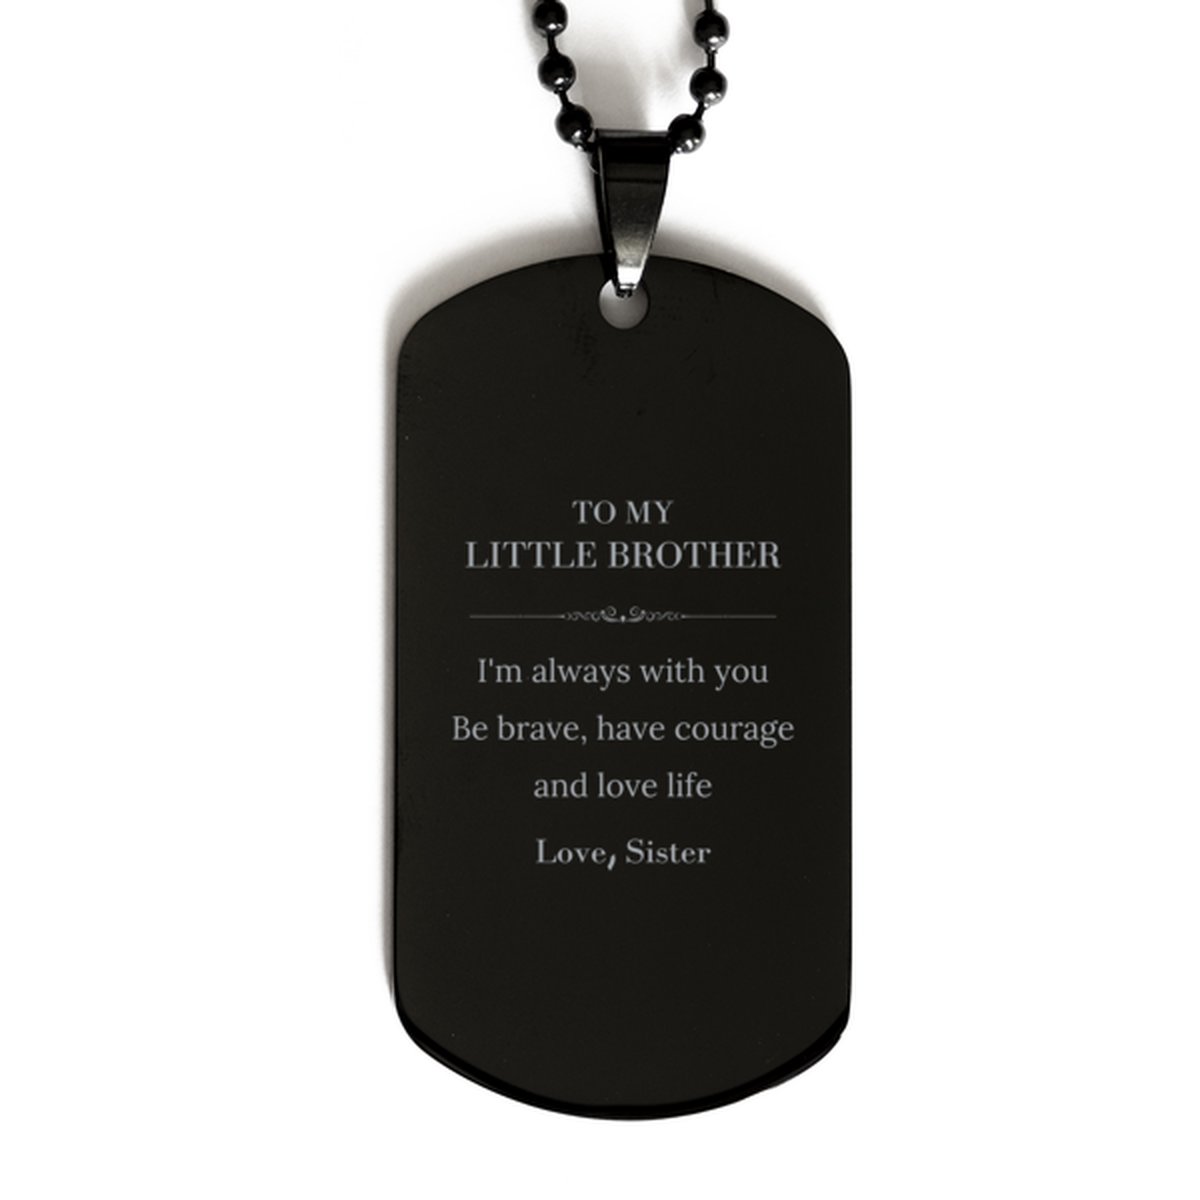 To My Little Brother Gifts from Sister, Unique Black Dog Tag Inspirational Christmas Birthday Graduation Gifts for Little Brother I'm always with you. Be brave, have courage and love life. Love, Sister